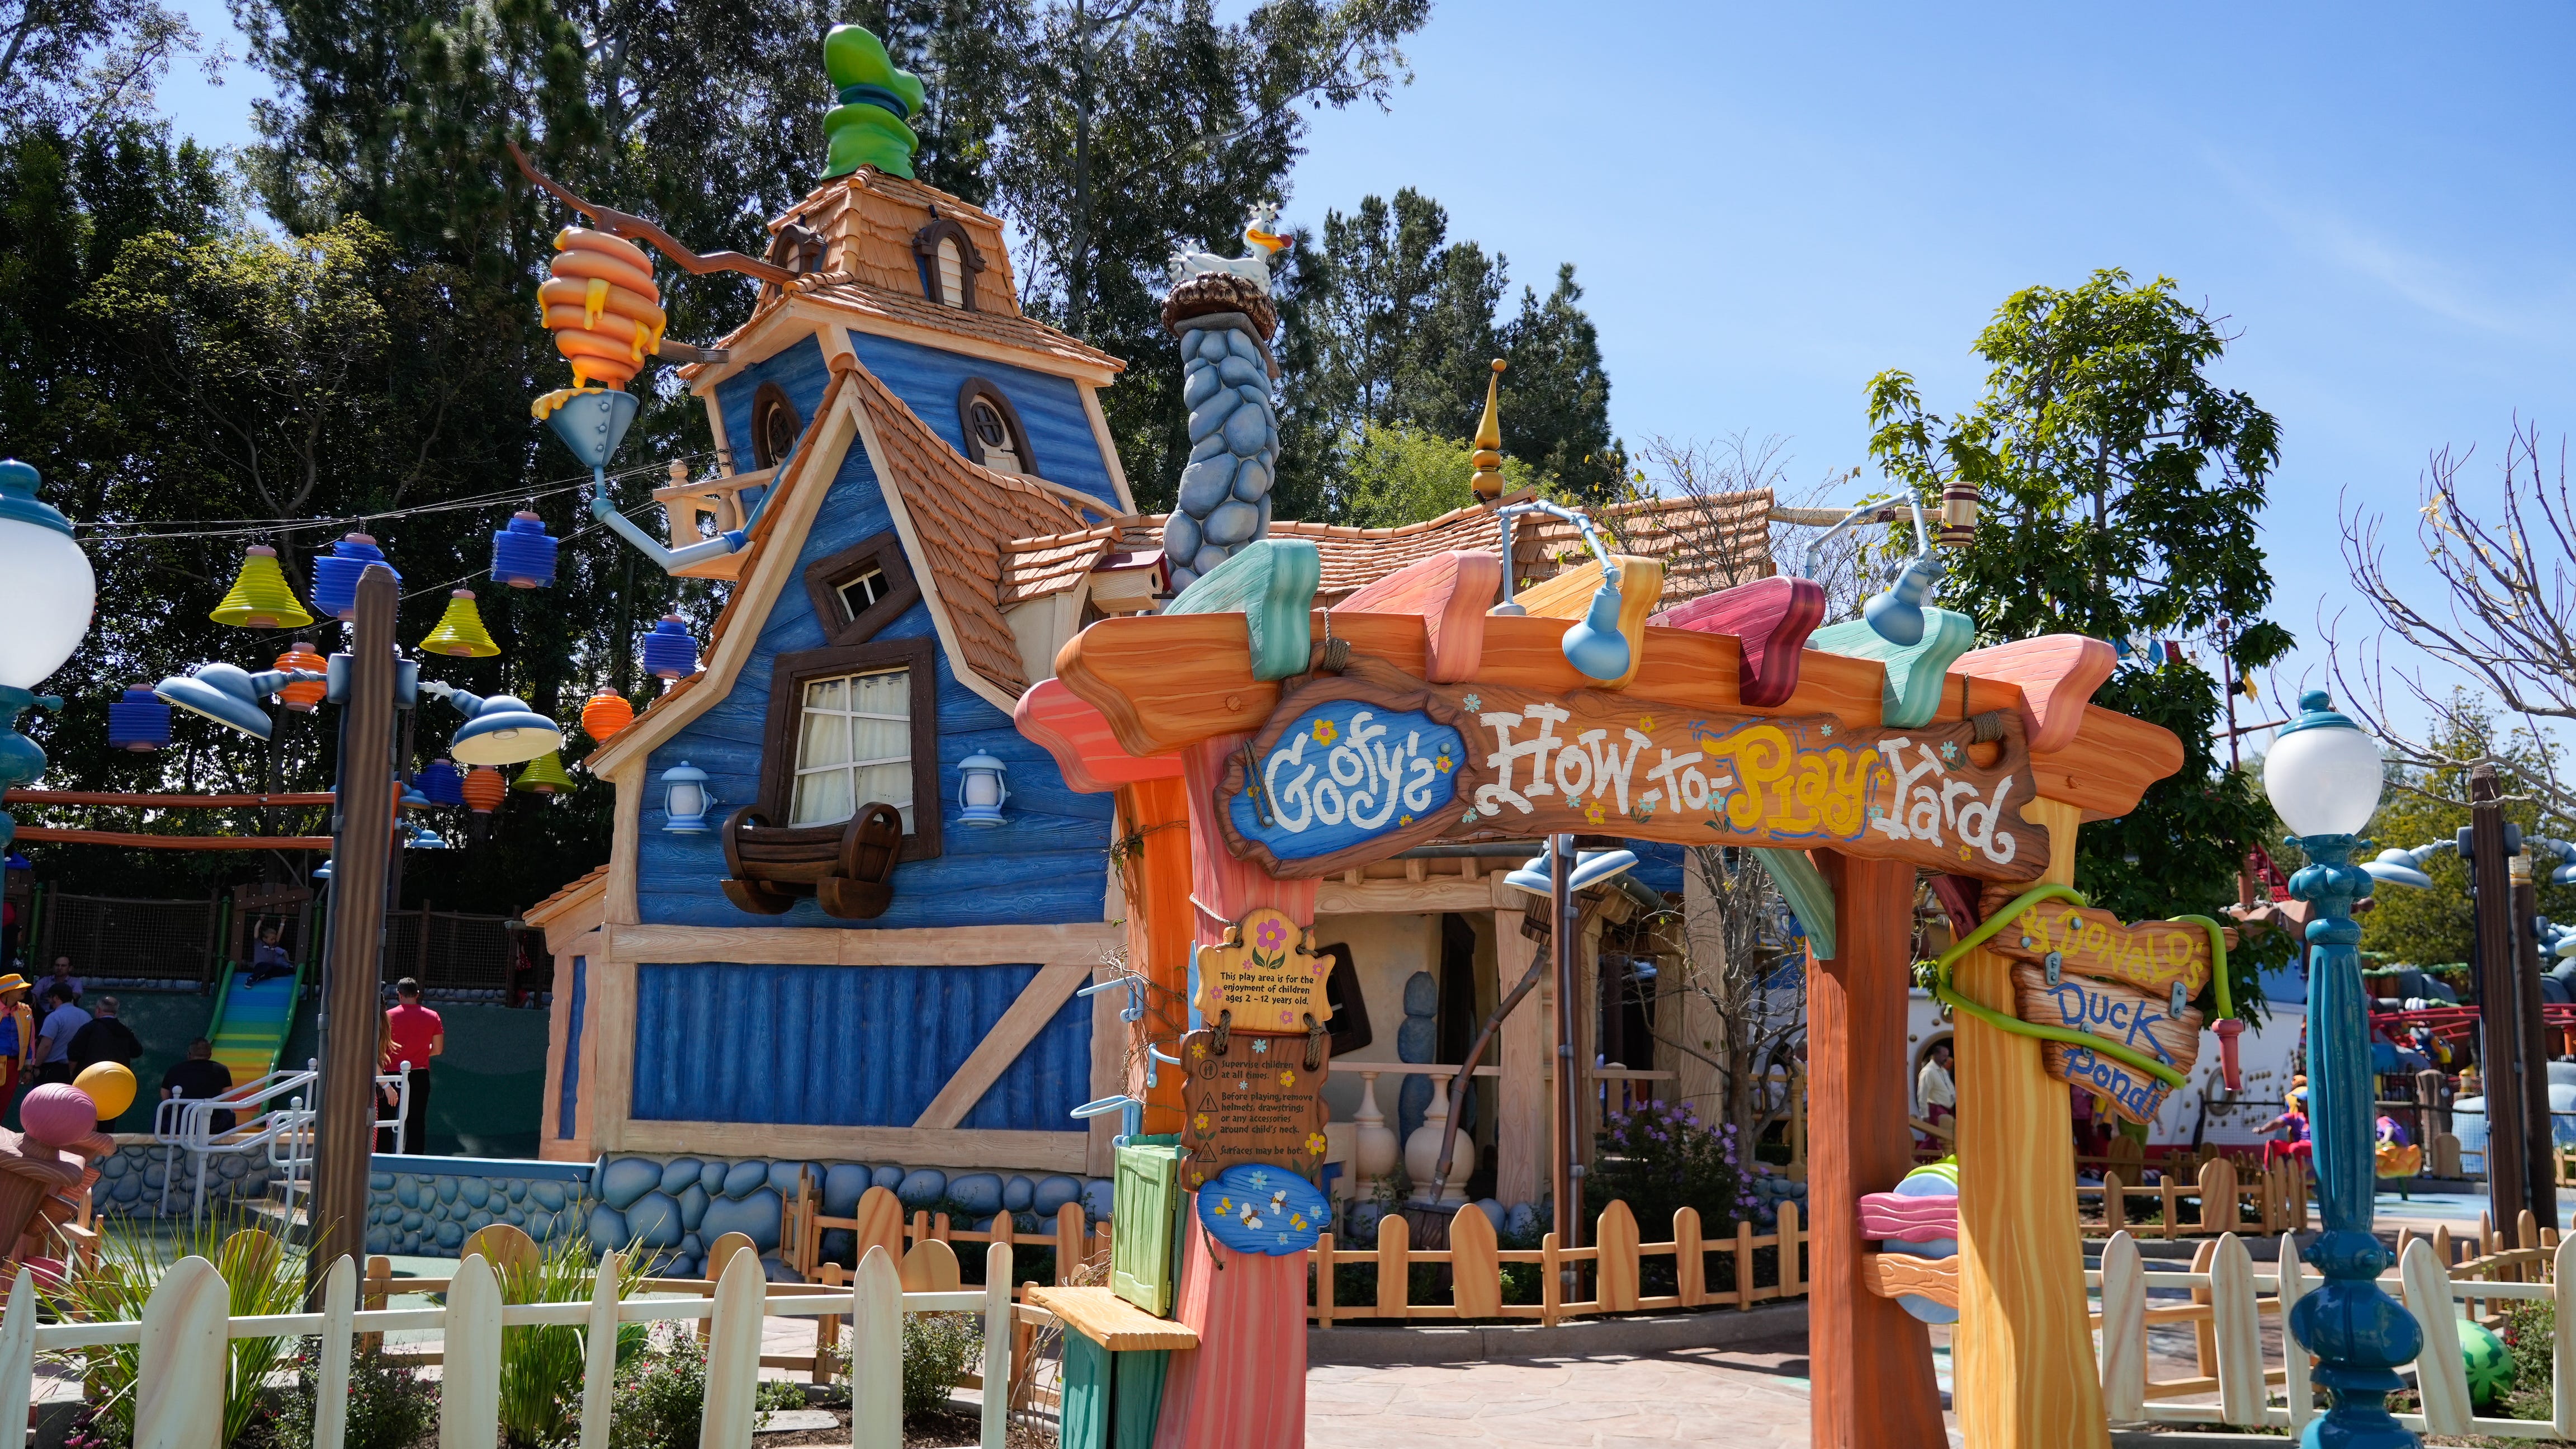 The exterior of Goofy's How-To-Play Yard is seen at Mickey's Toontown at Disneyland.